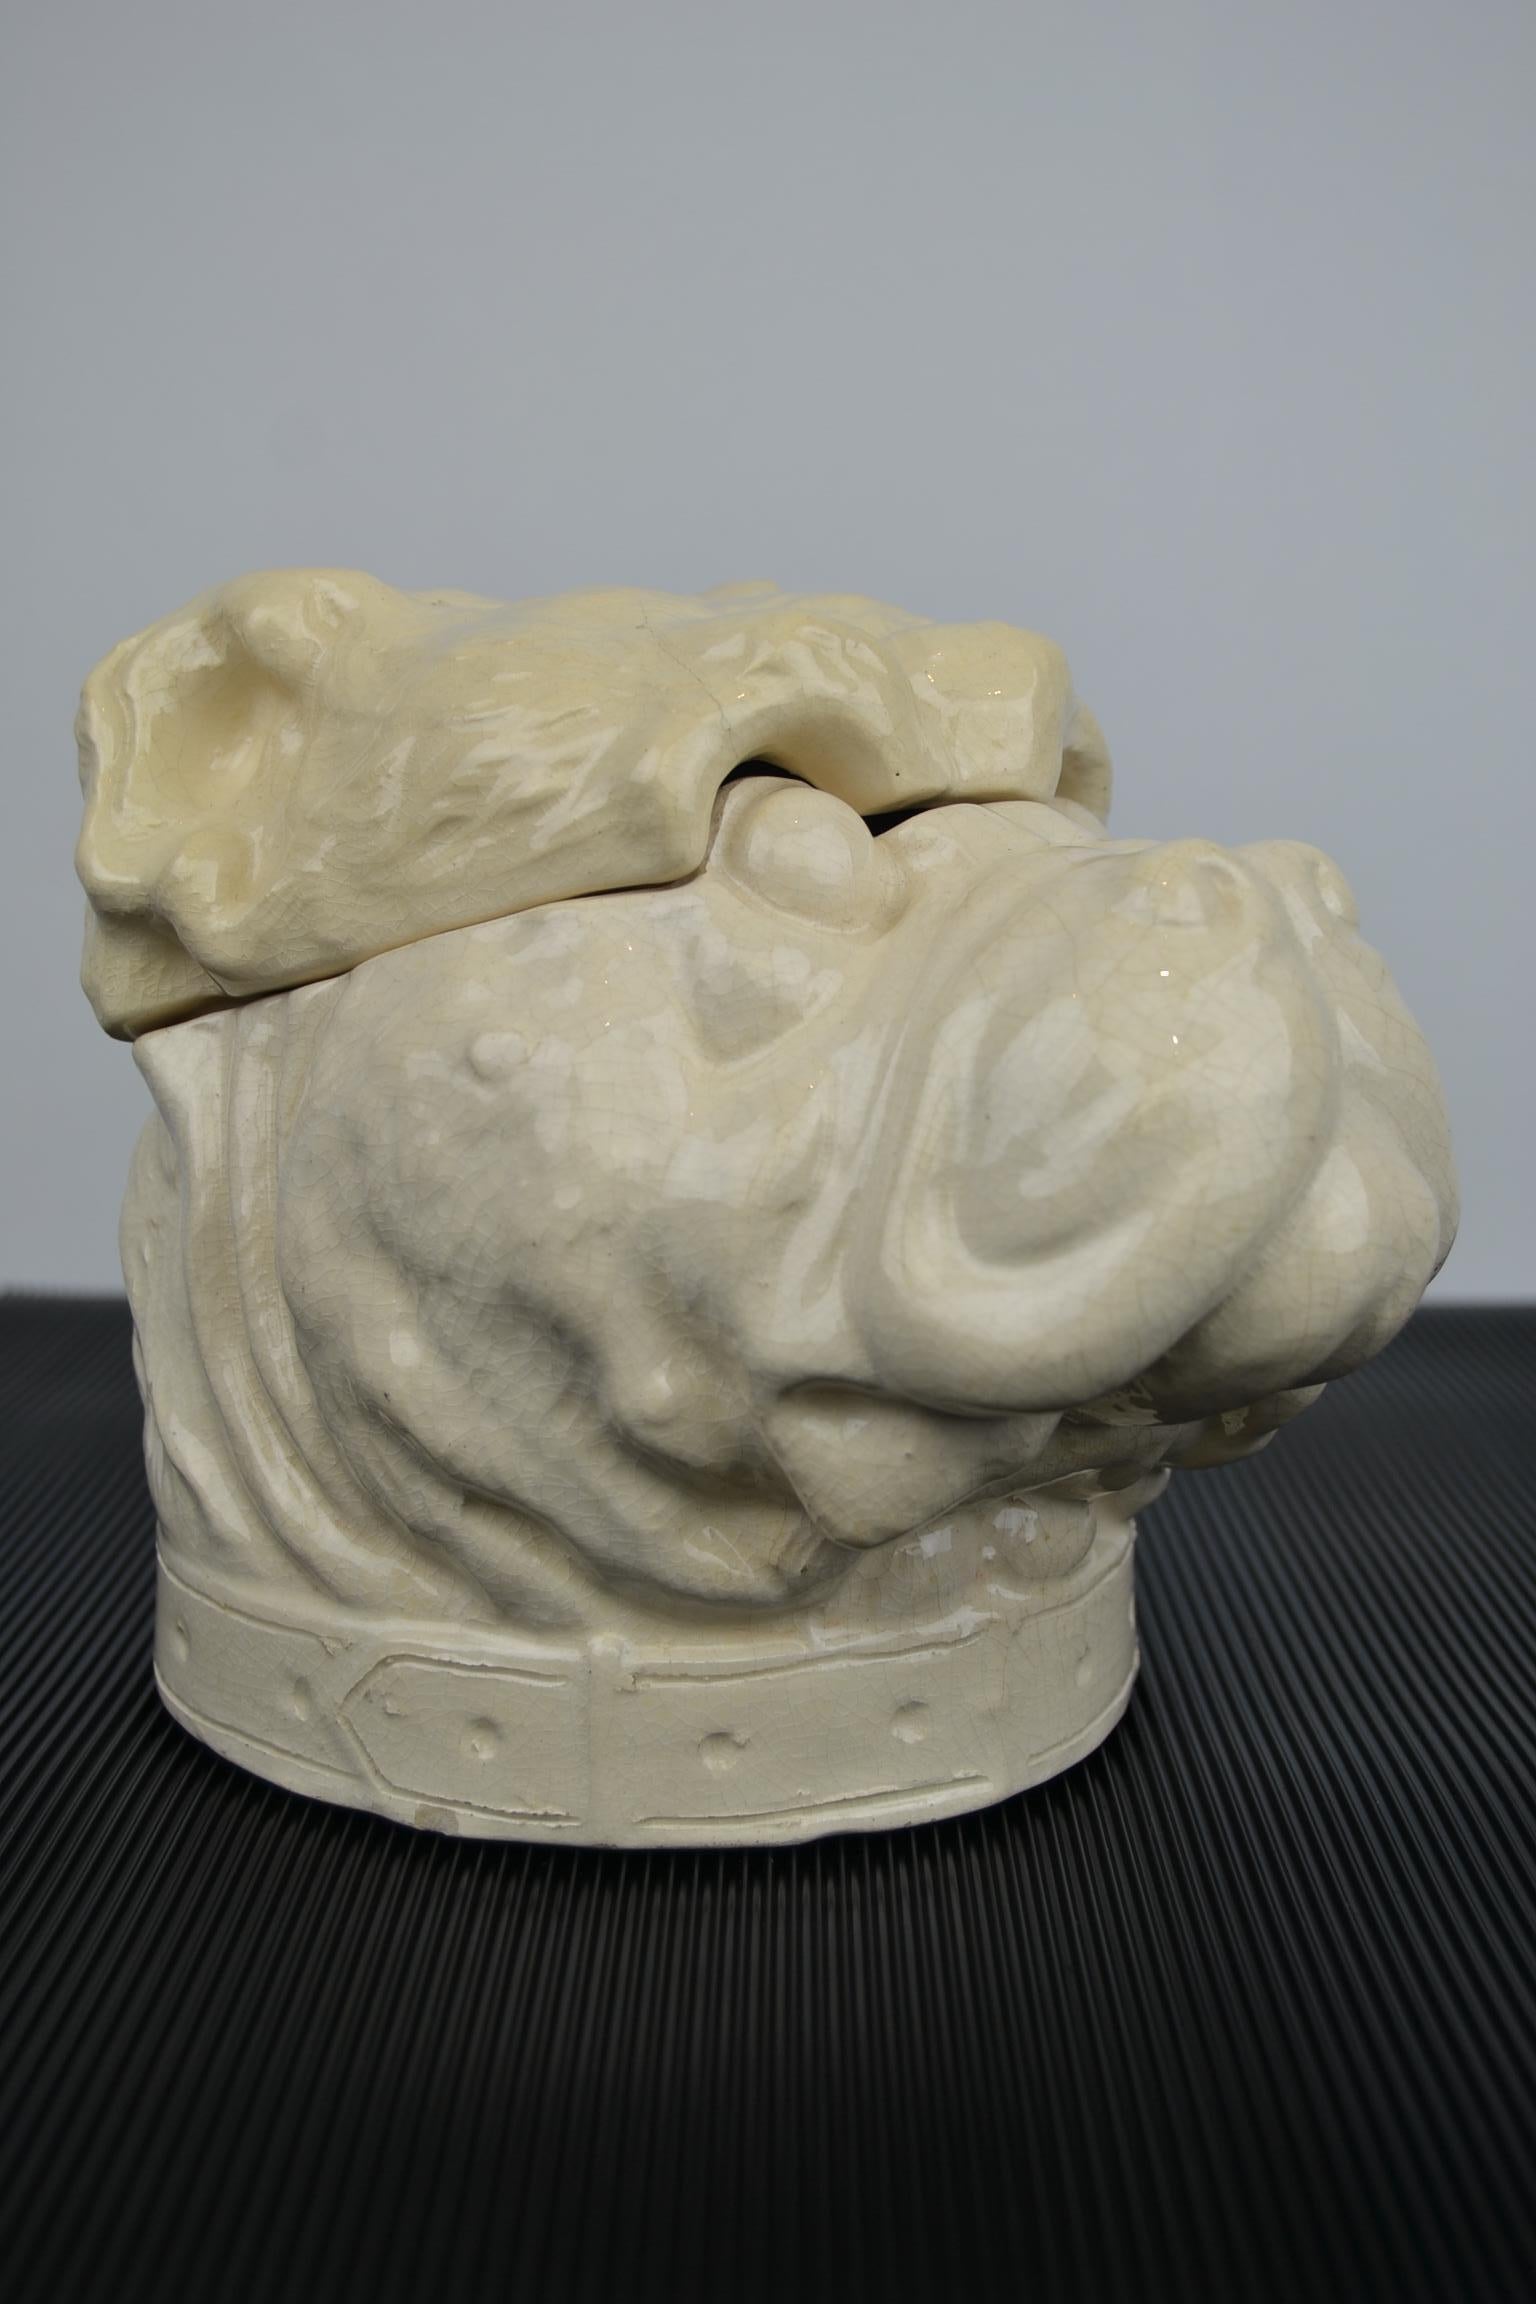 Stunning large porcelain tobacco pot - Tobacco Jar - Humidor in the shape of a Dog - Bulldog.
This Art Deco porcelain craquelé jar is very detailled and consists of two pieces:
the jar and the skull of the head.
It was made in Belgium by L.A.B,